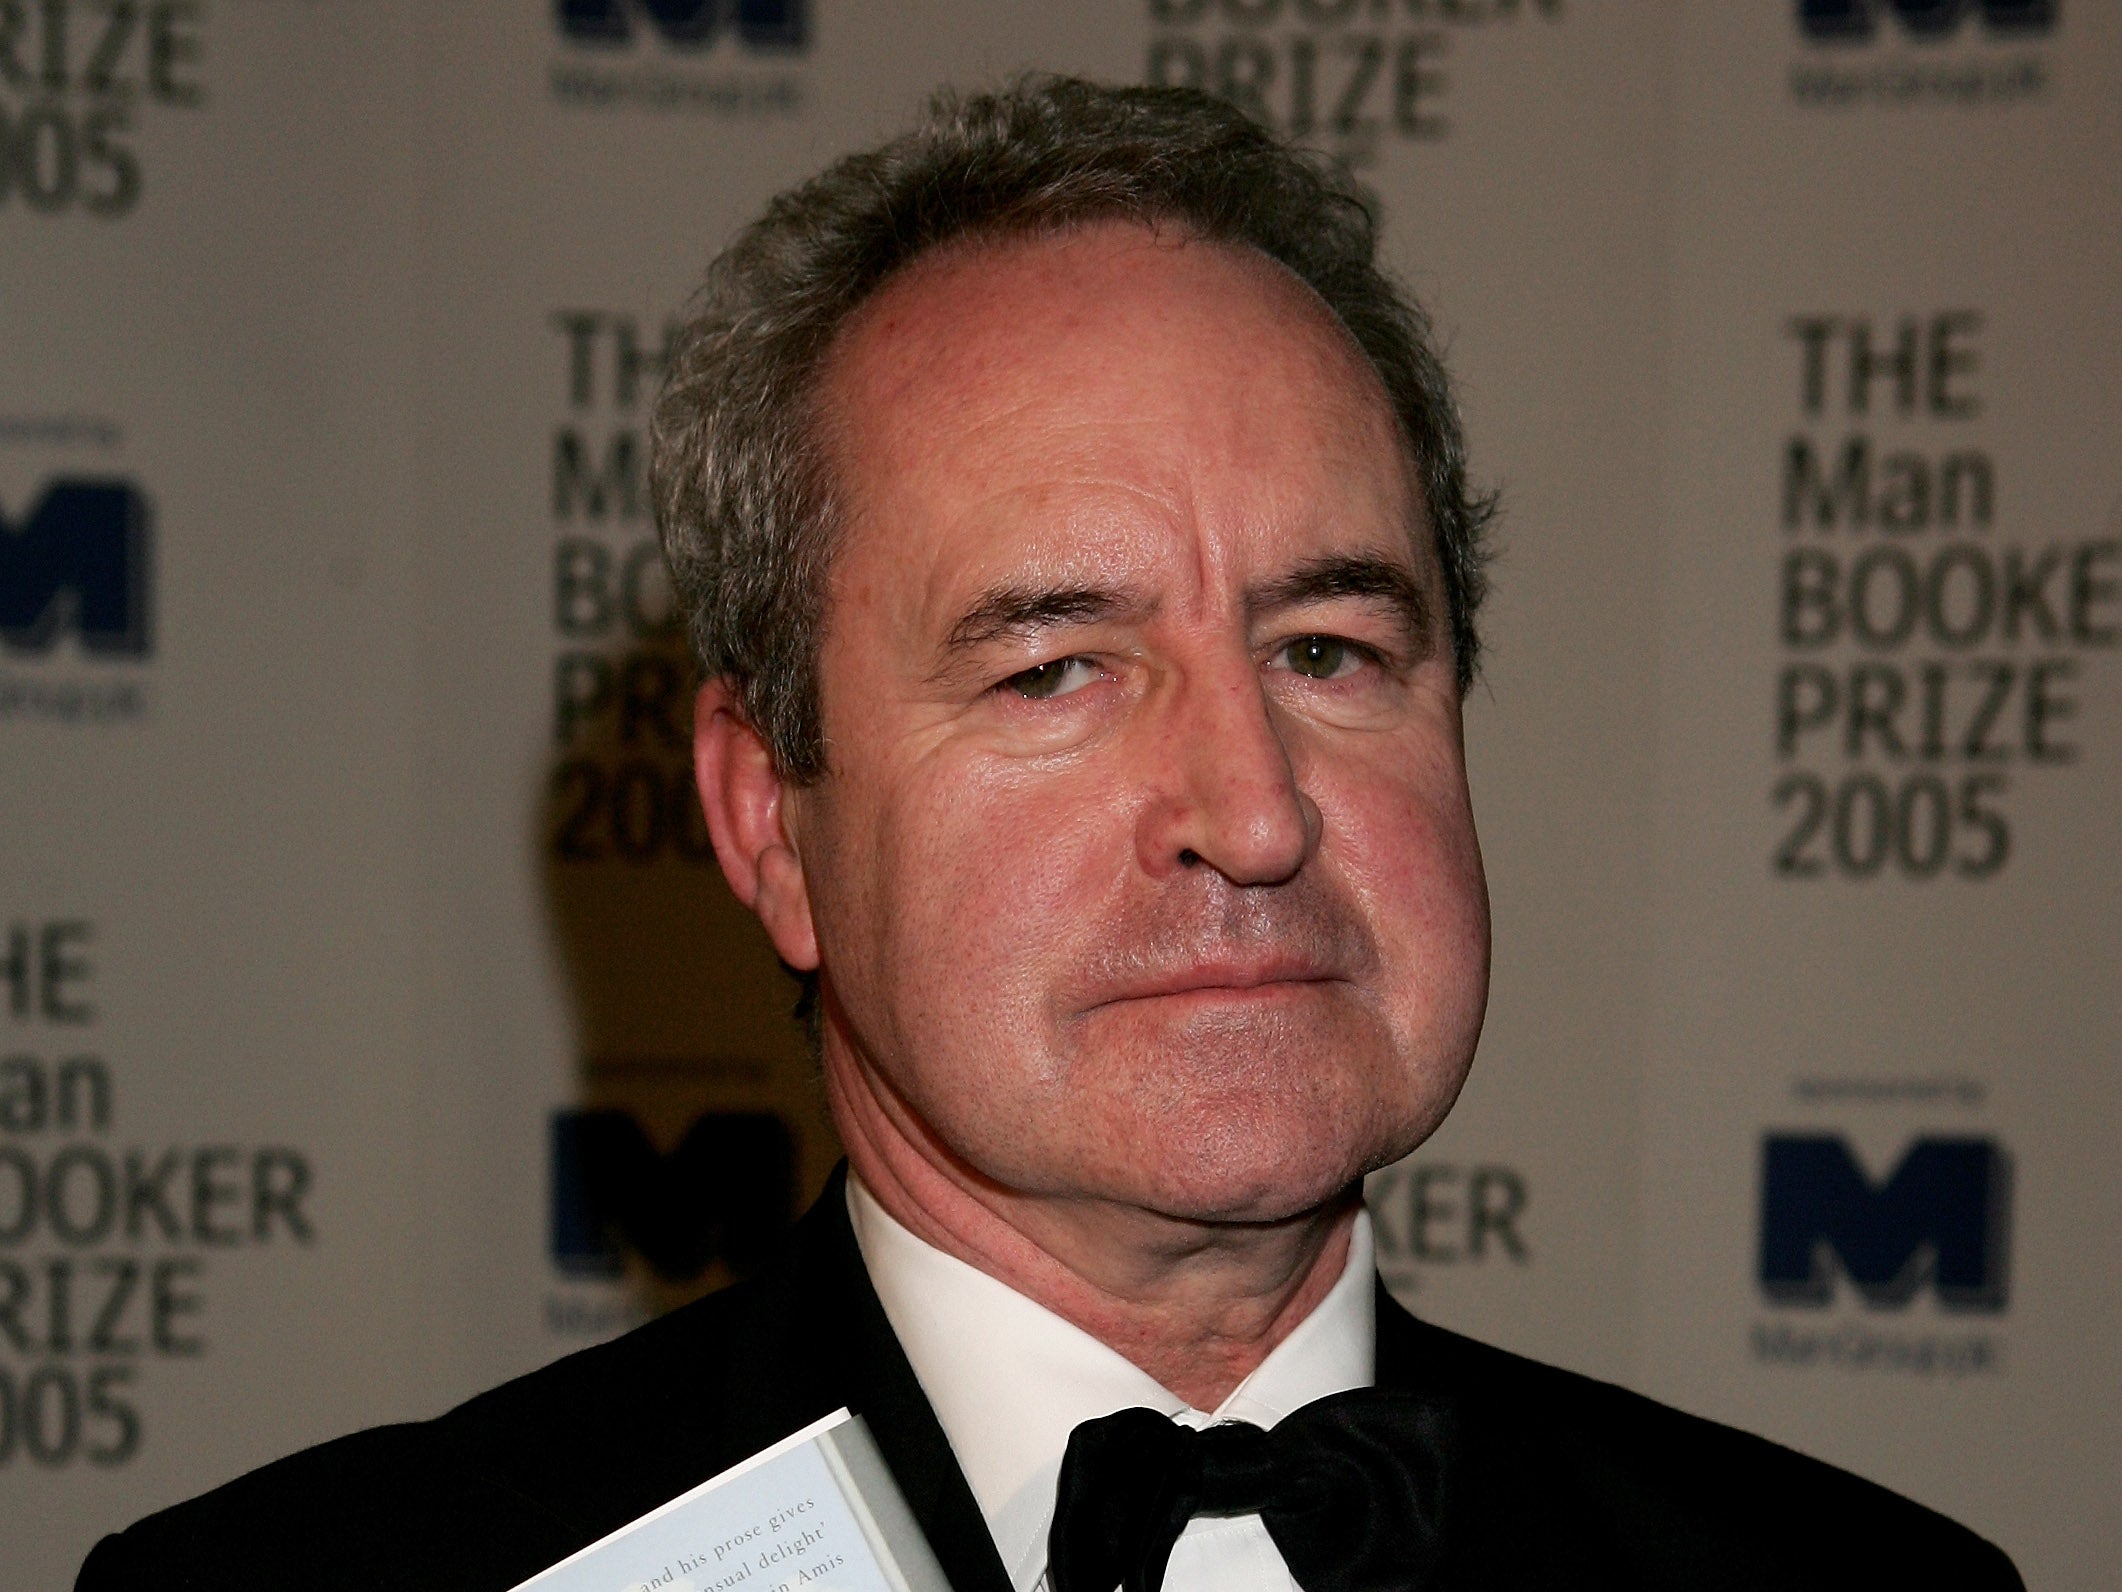 Banville pictured in 2005, around the release of ‘The Sea'